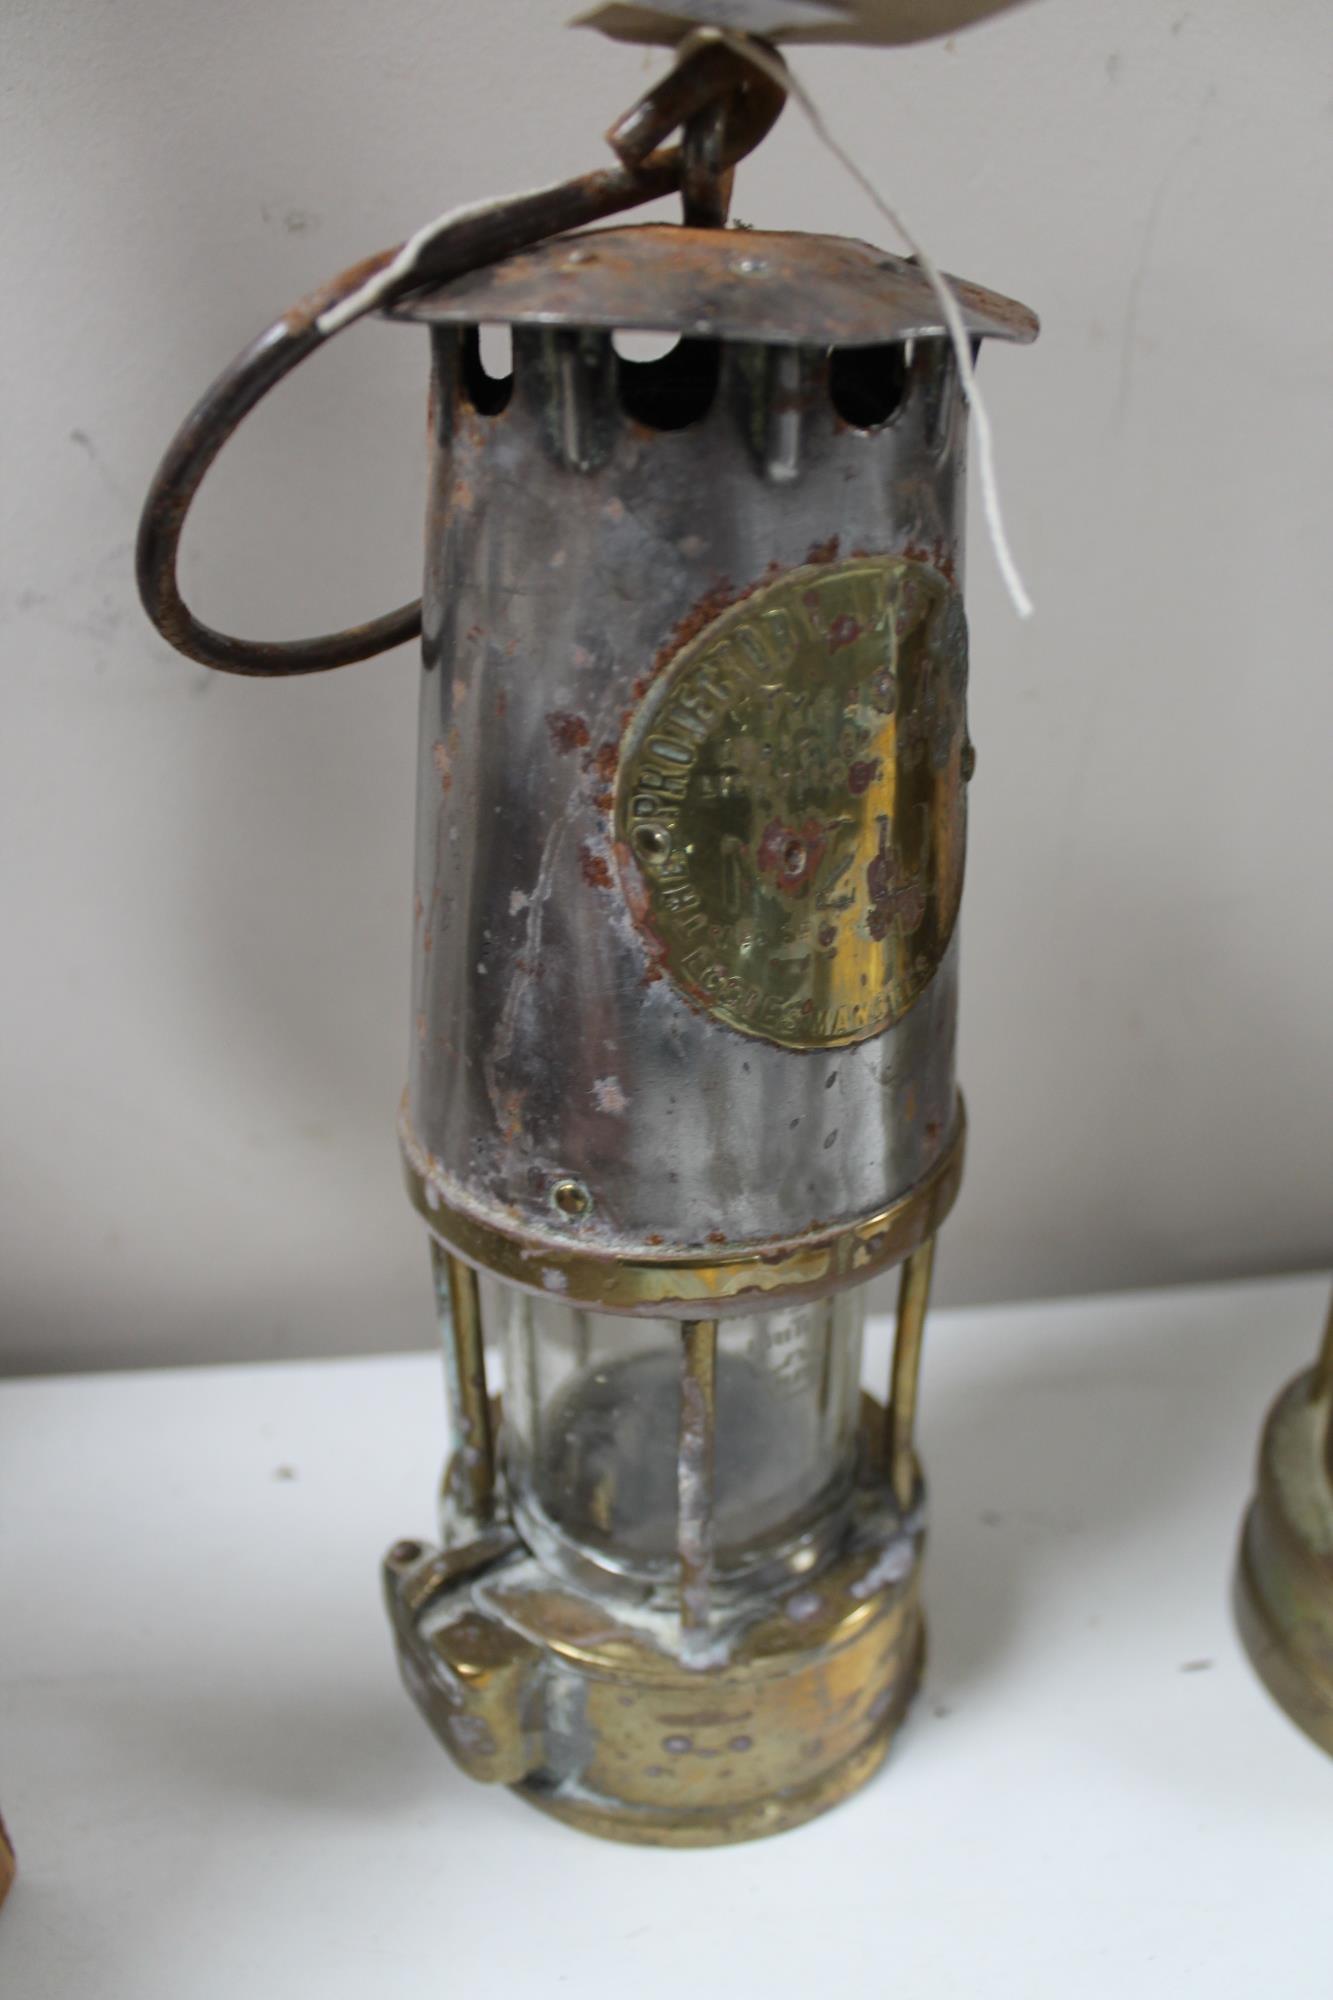 A brass miner's lamp by Eccles